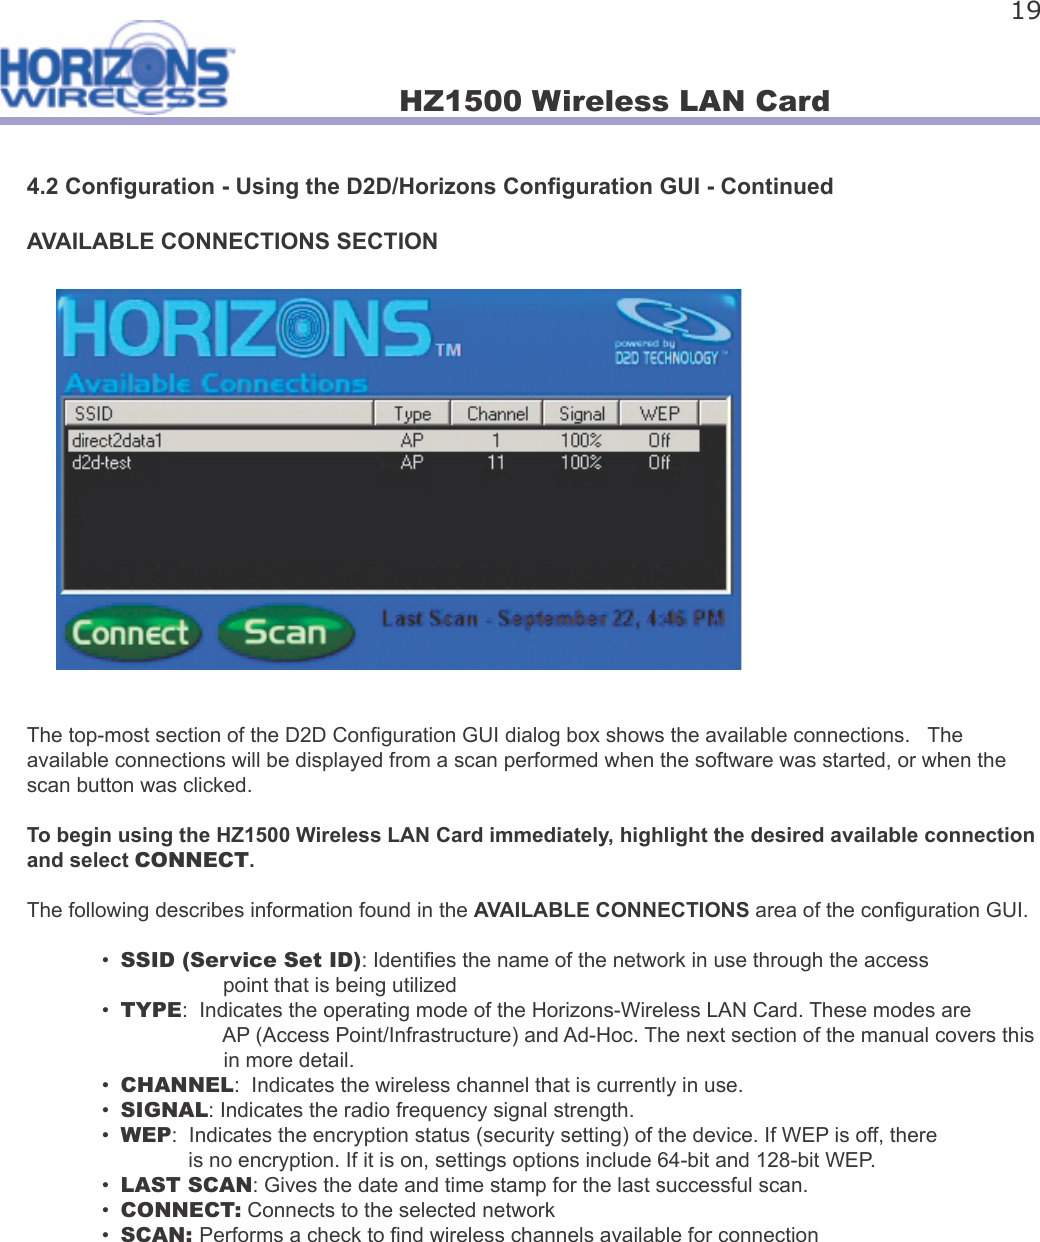 HZ1500 Wireless LAN Card 194.2 Con guration - Using the D2D/Horizons Con guration GUI - ContinuedAVAILABLE CONNECTIONS SECTIONThe top-most section of the D2D Con guration GUI dialog box shows the available connections.   The available connections will be displayed from a scan performed when the software was started, or when the scan button was clicked.To begin using the HZ1500 Wireless LAN Card immediately, highlight the desired available connection and select CONNECT.The following describes information found in the AVAILABLE CONNECTIONS area of the con guration GUI.  •  SSID (Service Set ID): Identi es the name of the network in use through the access                                 point that is being utilized  •  TYPE:  Indicates the operating mode of the Horizons-Wireless LAN Card. These modes are                                   AP (Access Point/Infrastructure) and Ad-Hoc. The next section of the manual covers this                                    in more detail.  •  CHANNEL:  Indicates the wireless channel that is currently in use.   •  SIGNAL: Indicates the radio frequency signal strength.  •  WEP:  Indicates the encryption status (security setting) of the device. If WEP is off, there       is no encryption. If it is on, settings options include 64-bit and 128-bit WEP.  •  LAST SCAN: Gives the date and time stamp for the last successful scan.  •  CONNECT: Connects to the selected network  •  SCAN: Performs a check to  nd wireless channels available for connection 